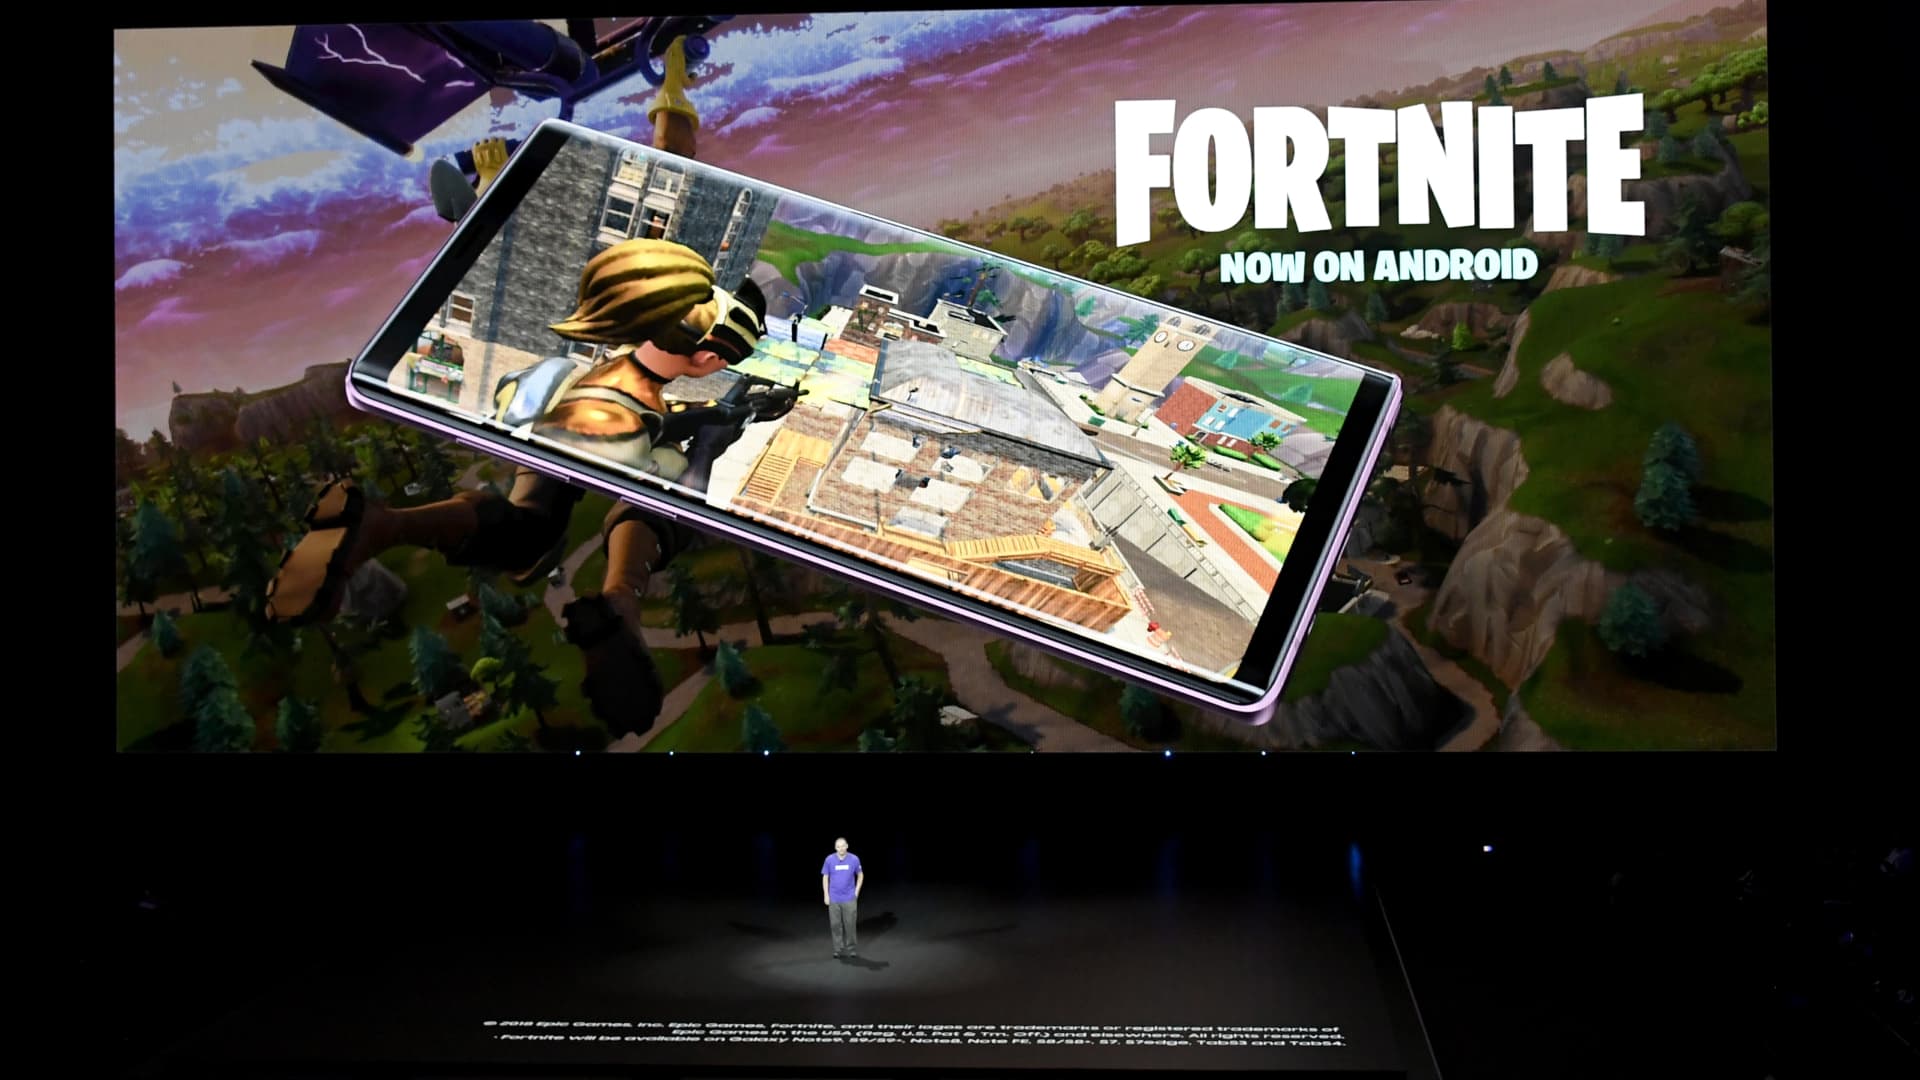 The reason Epic landed a $15 billion valuation is not Fortnite success